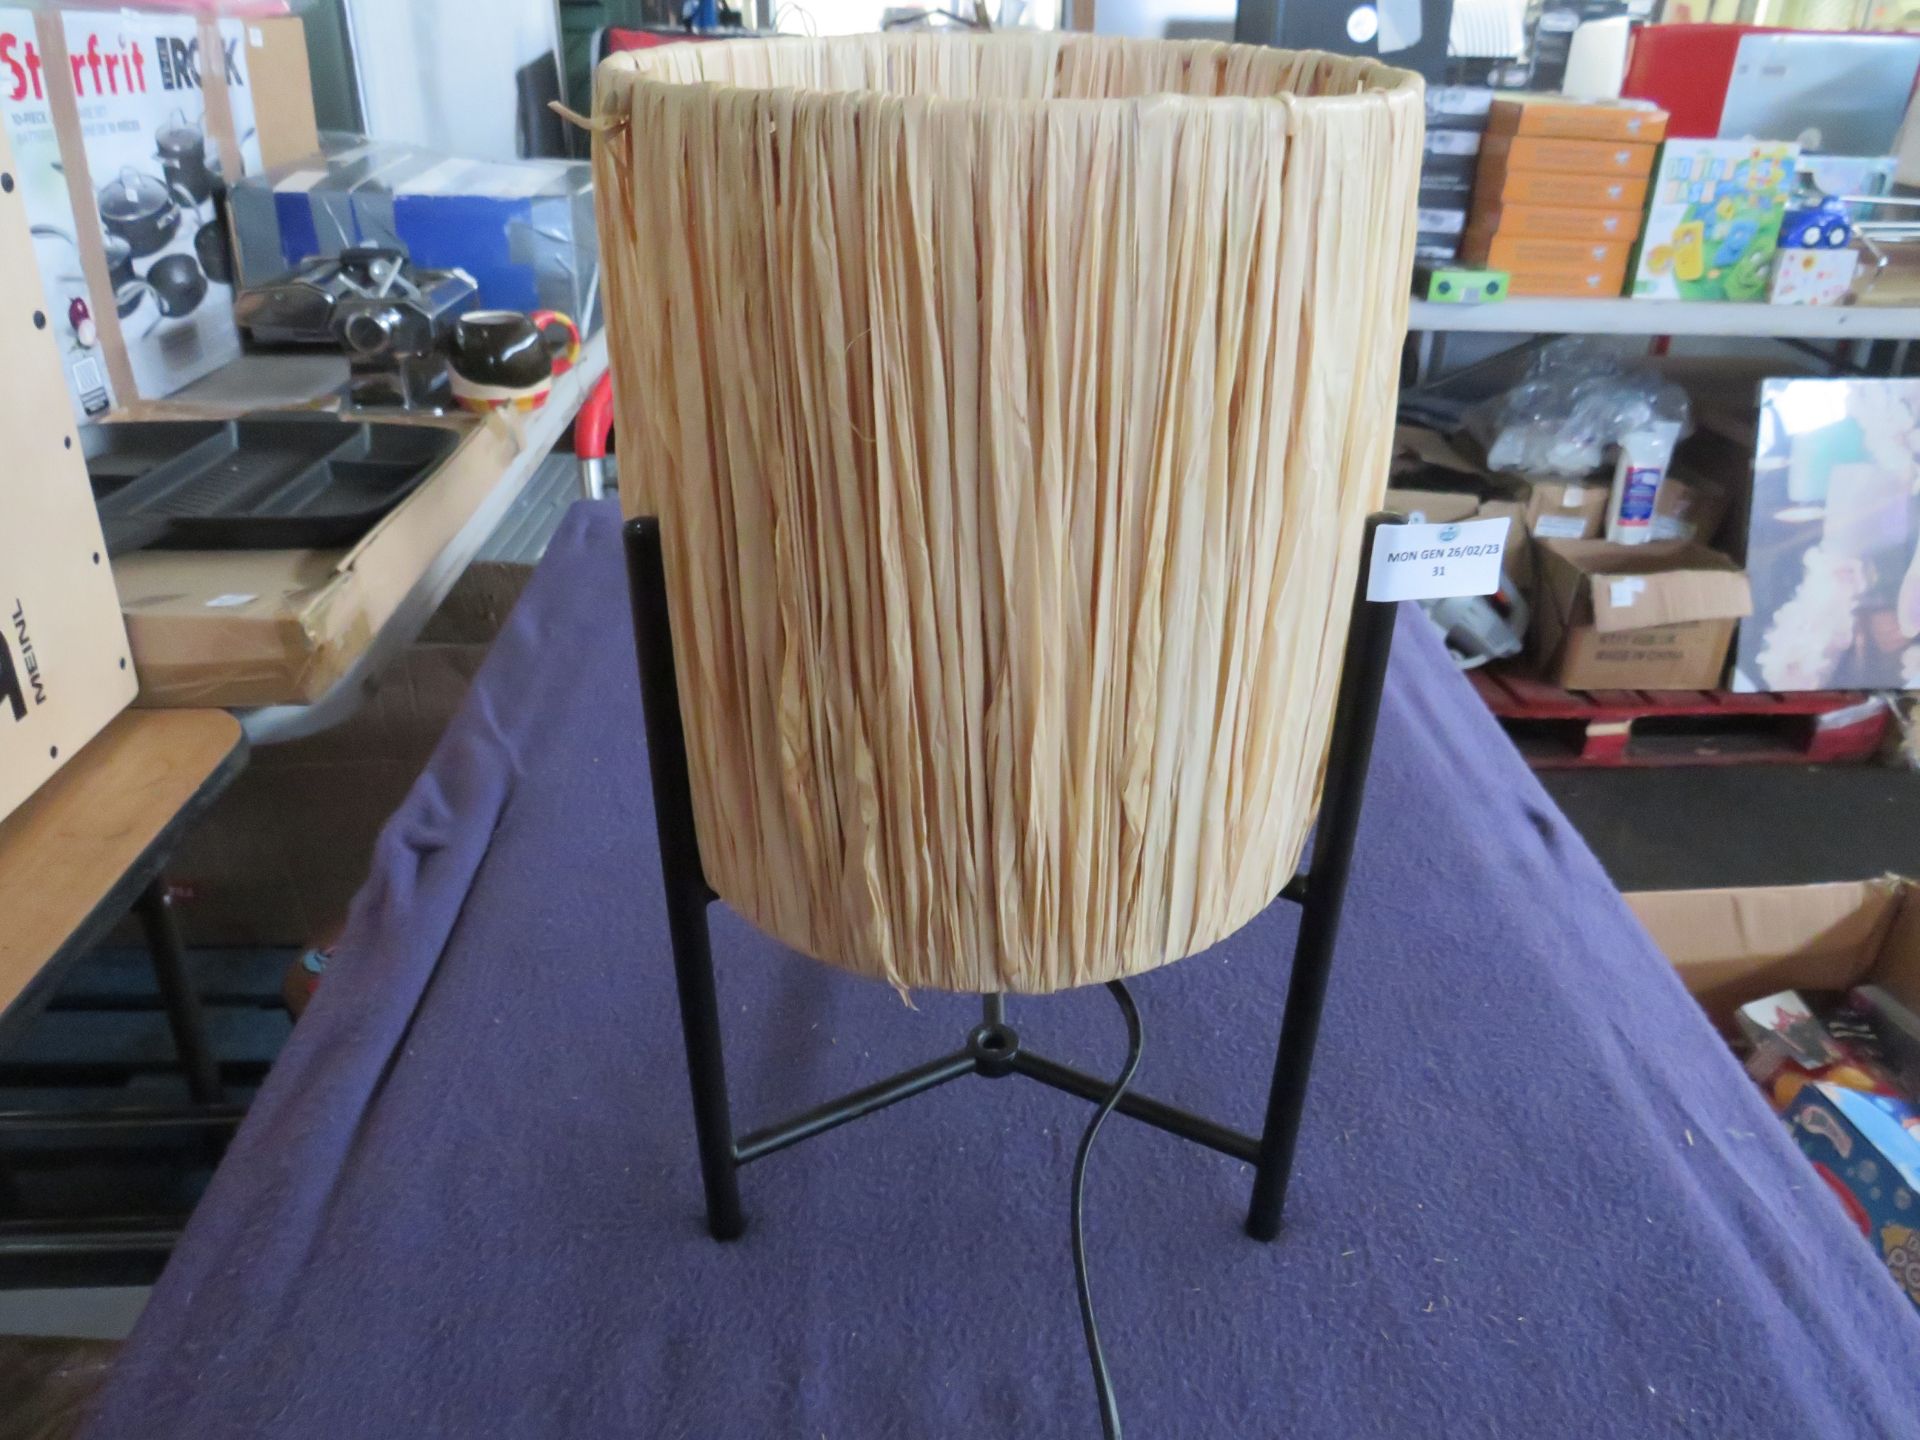 Table Lamp - Please See Image For Design - No Packaging.